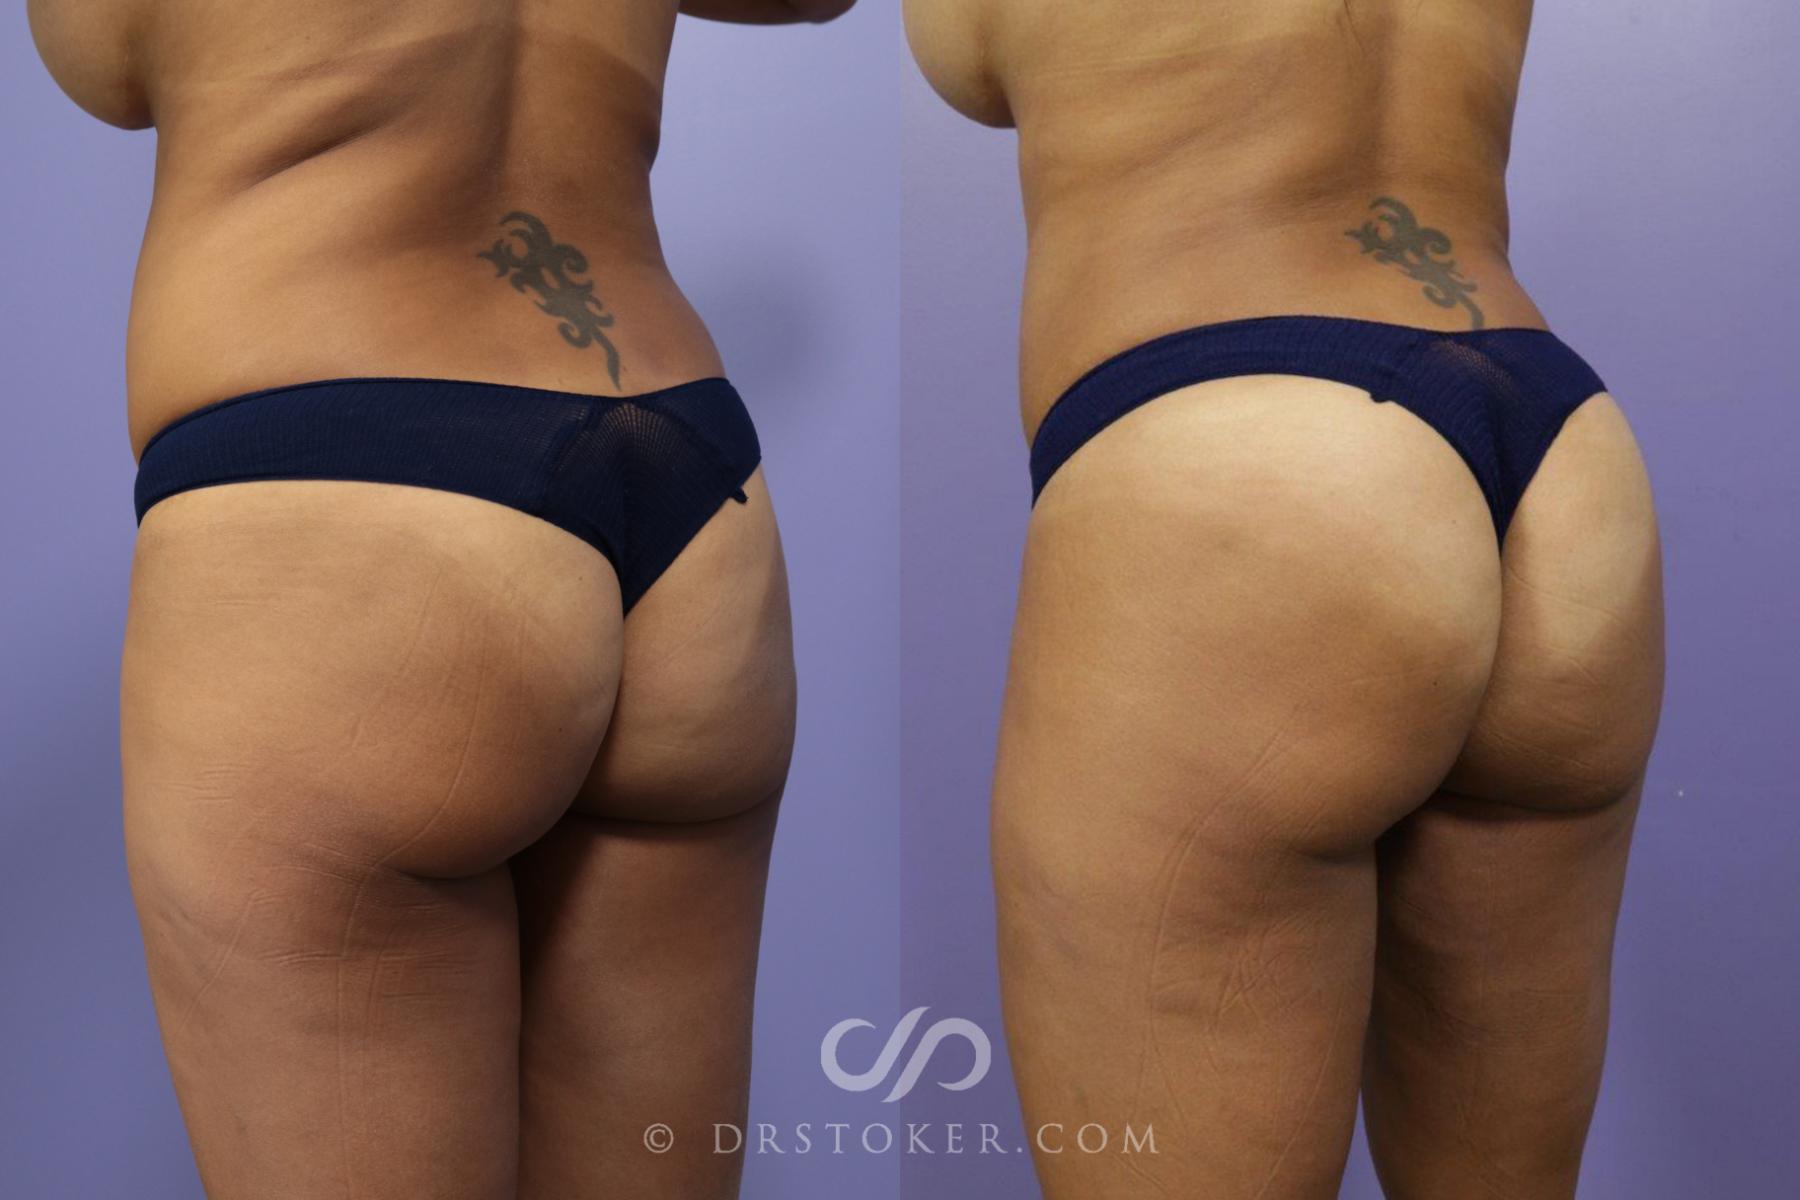 What the Heck Is a Brazilian Butt Lift—and Is It Dangerous?